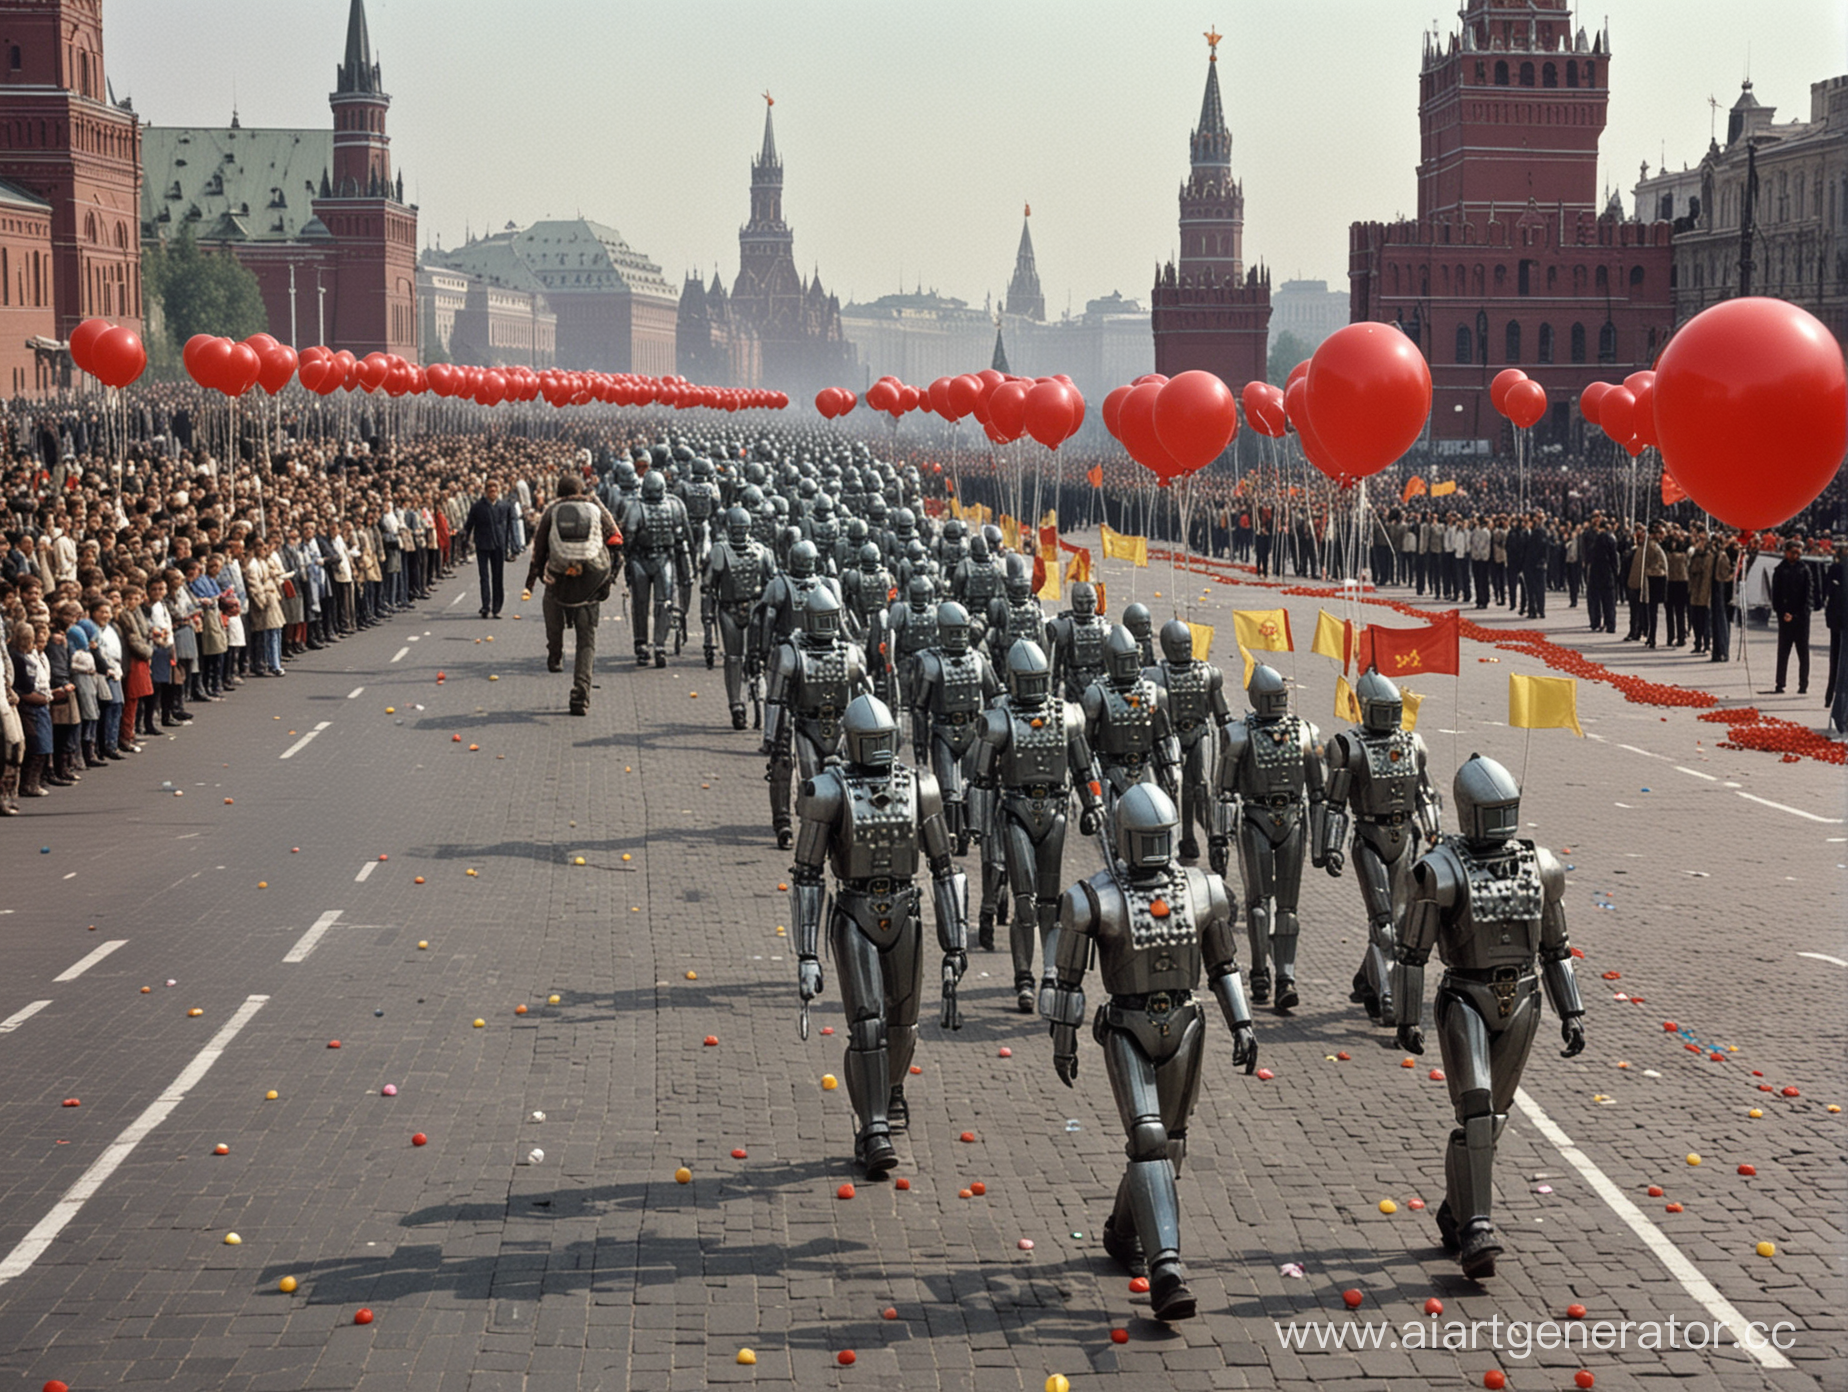 parade on Red Square in Moscow in 1977 shiny steel robots wiht weapons  march in straight rows past the mausoleum , red flags with a hammer and sickle, red yellow green wite blue balloons fly into the sky